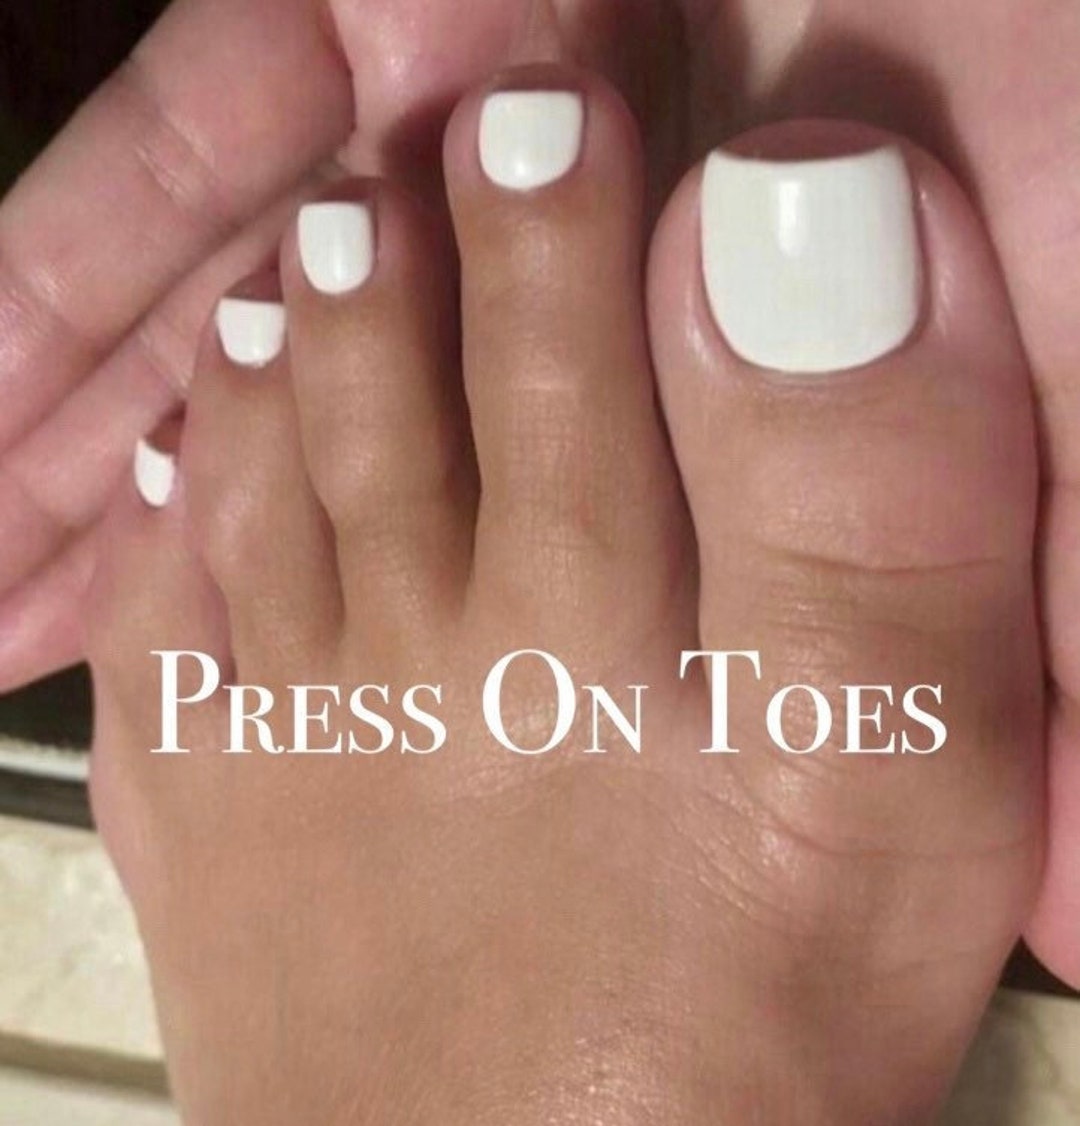 Solid Color Press on Nails for Feet Short Fake Toenails Glossy Black/Purple/ White Wearable False Toe Nails for Women Foot Decor